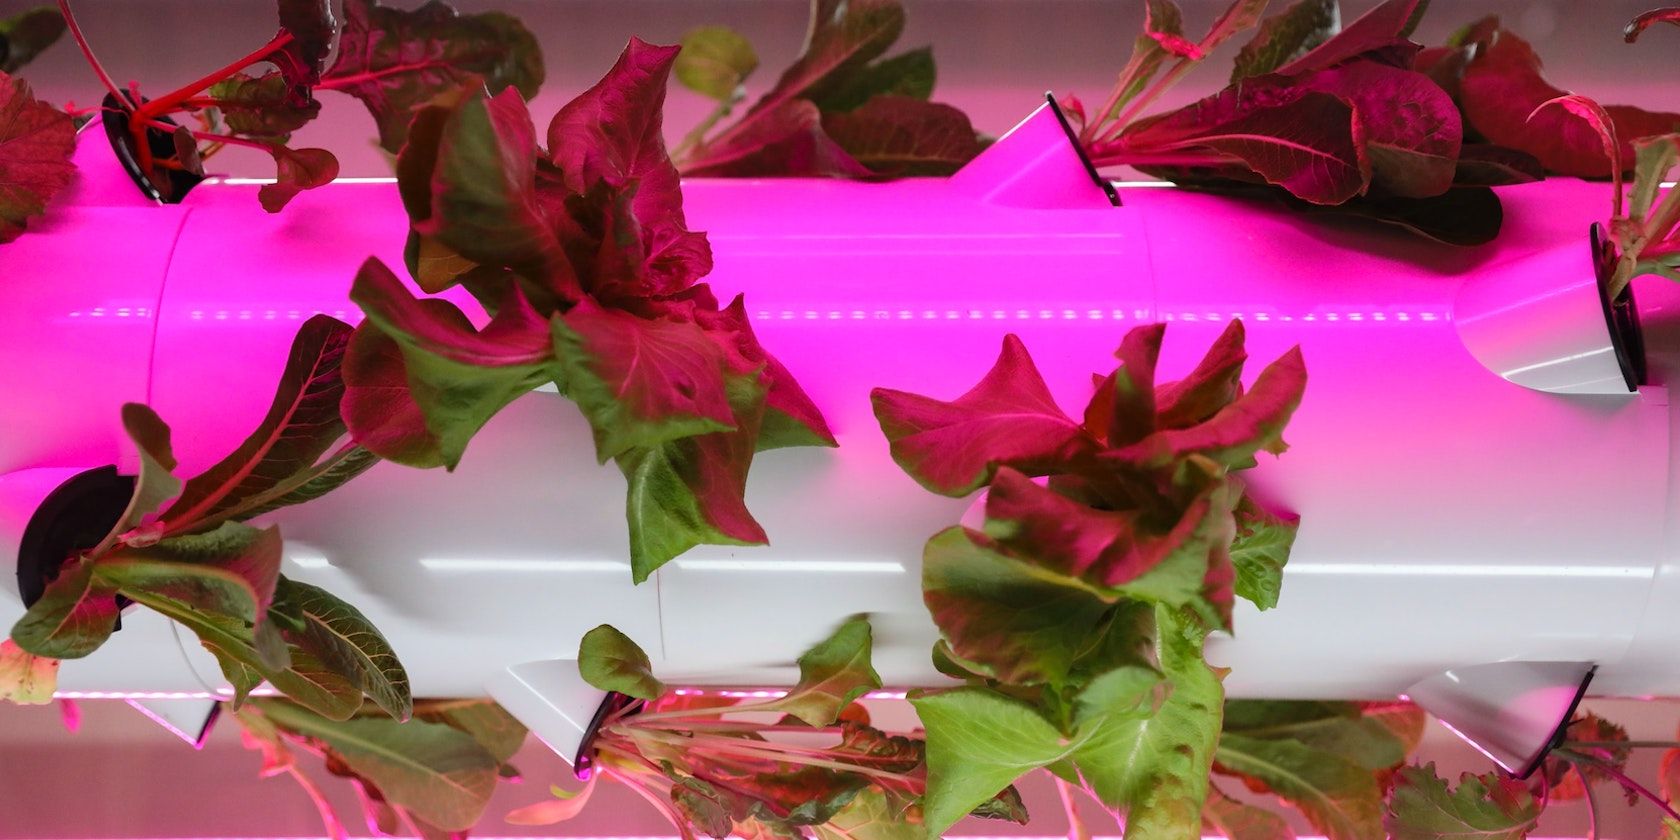 Lettuce plants growing from openings in a horizontal PVC pipe under neon pink lights